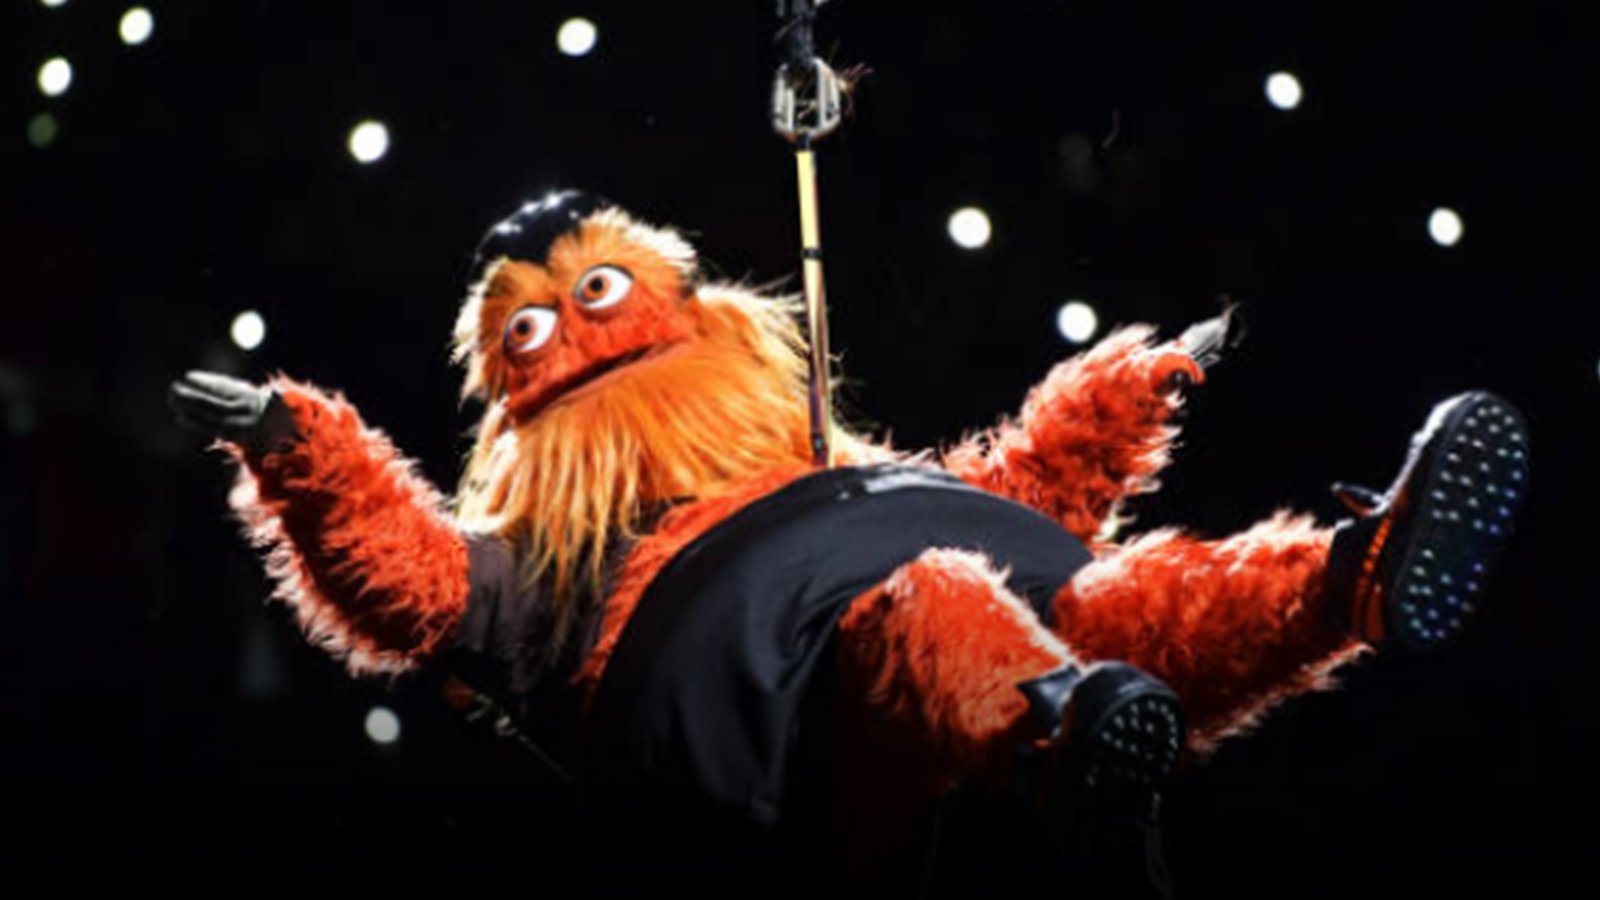 Gritty talks! The Flyers mascot speaks for the first time, hits on Kim Kardashian.